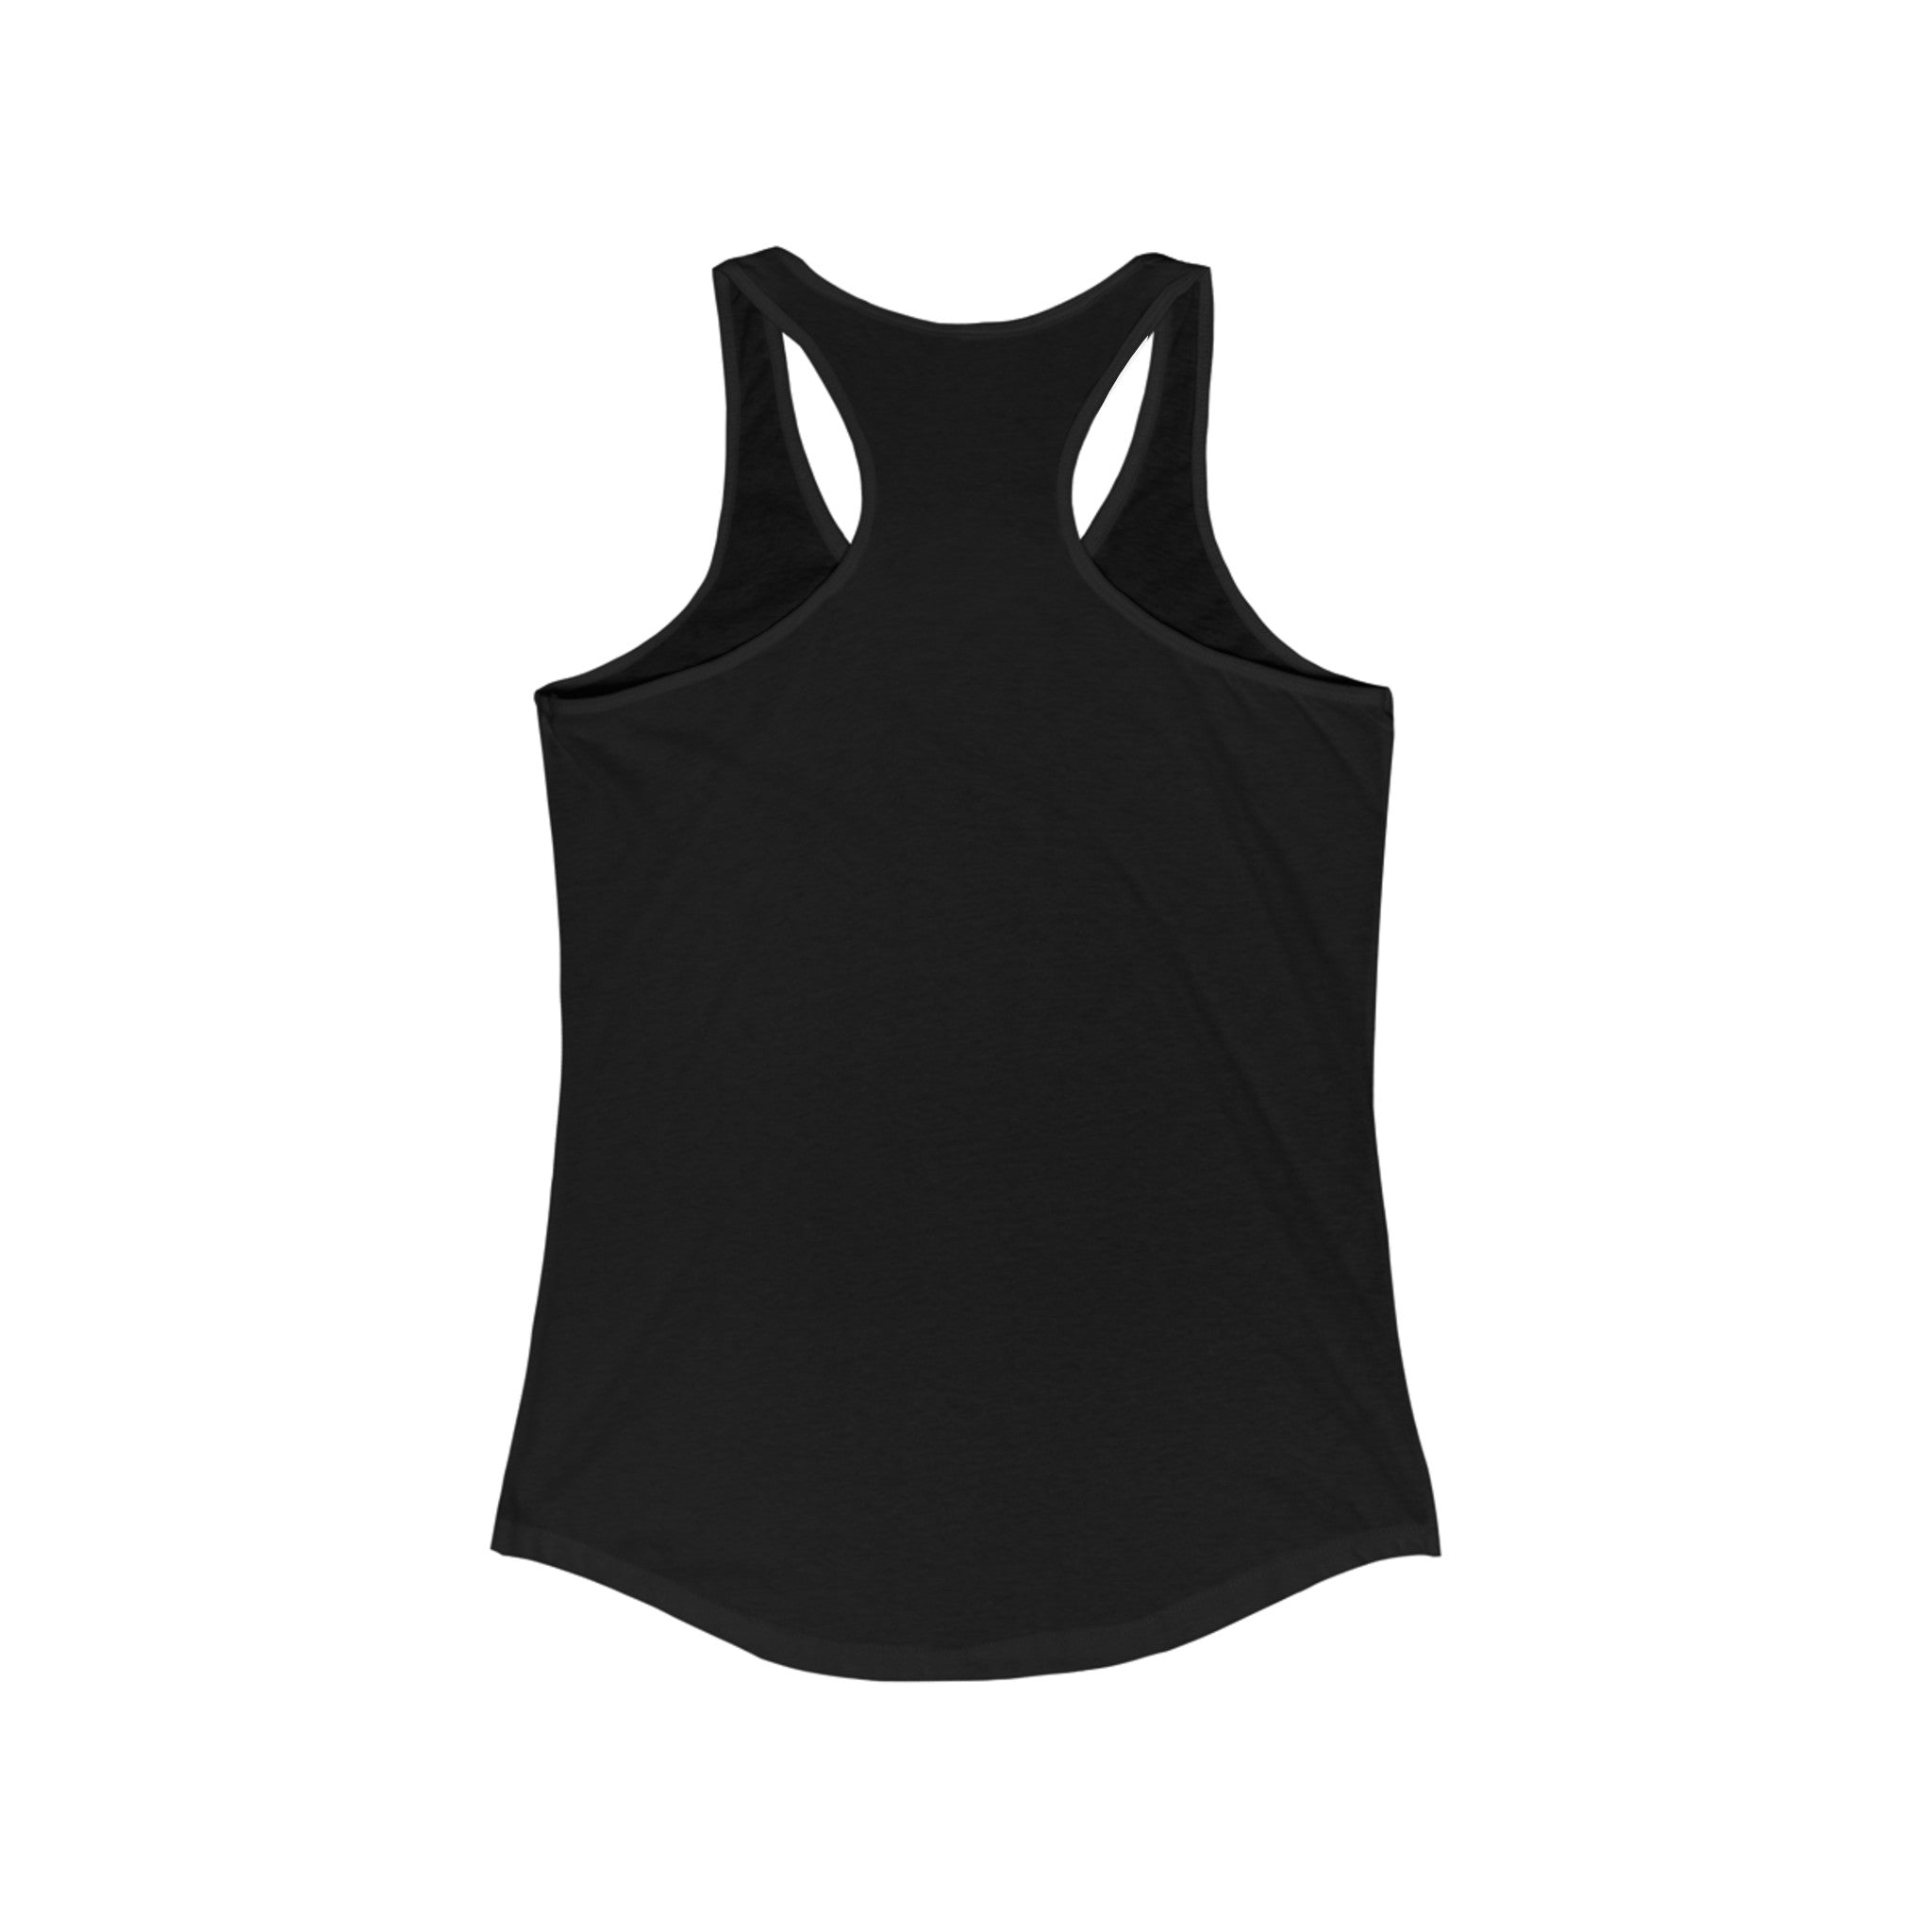 The Watts Up - Women's Racerback Tank, a lightweight black racerback tank top, is displayed on a white background—perfect for an active lifestyle.